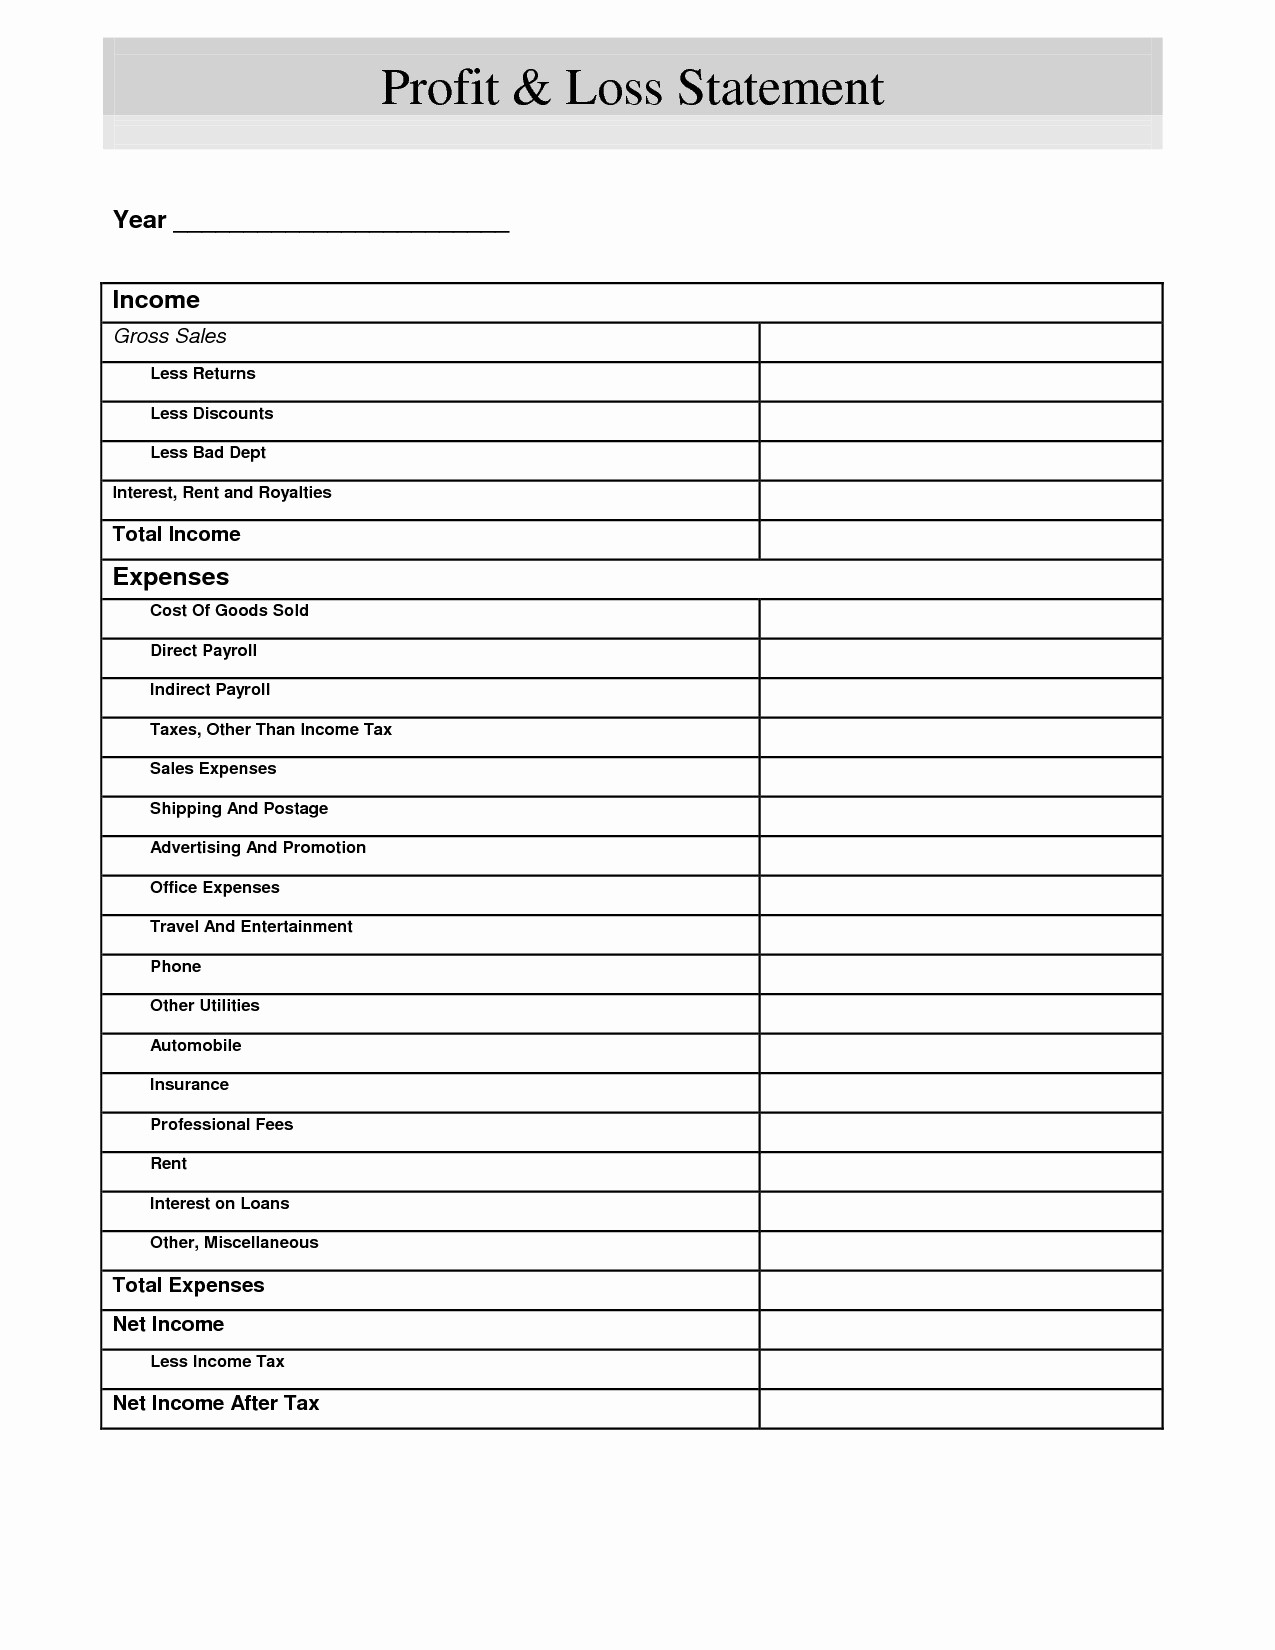 Blank Profit and Loss Sheet Inspirational Blank Profit and Loss Statement form Templates Resume